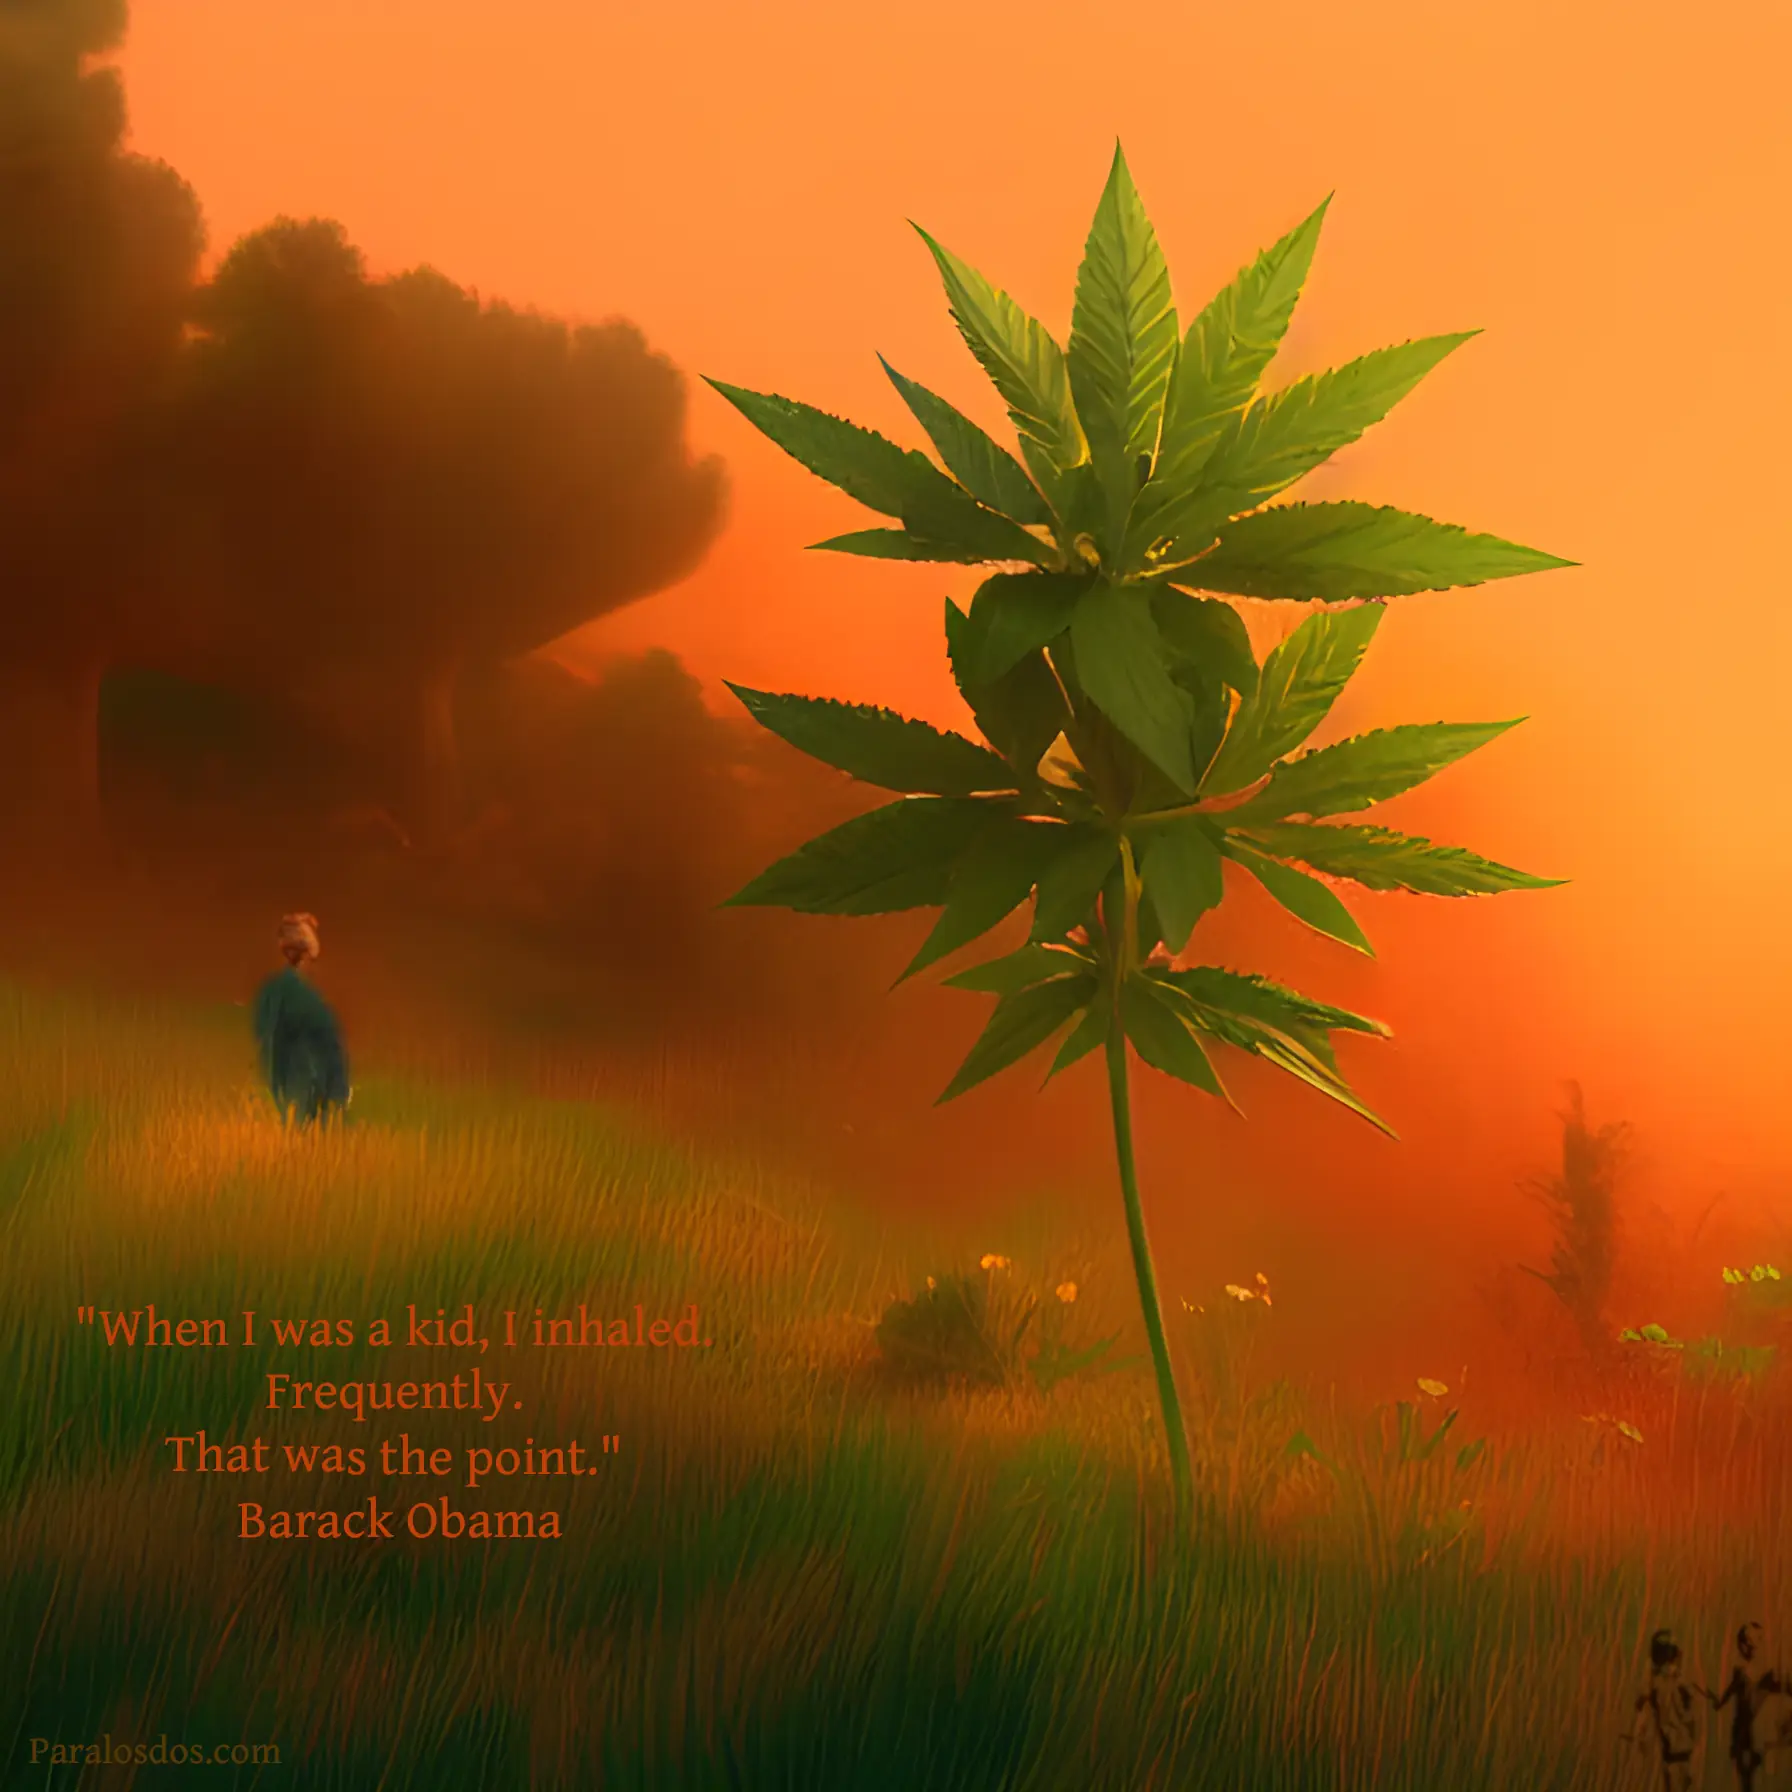 An artistic rendering of a large marijuana plant in the foreground and a hazy figure in the midground left. The quote reads: "When I was a kid, I inhaled. Frequently. That was the point." Barack Obama